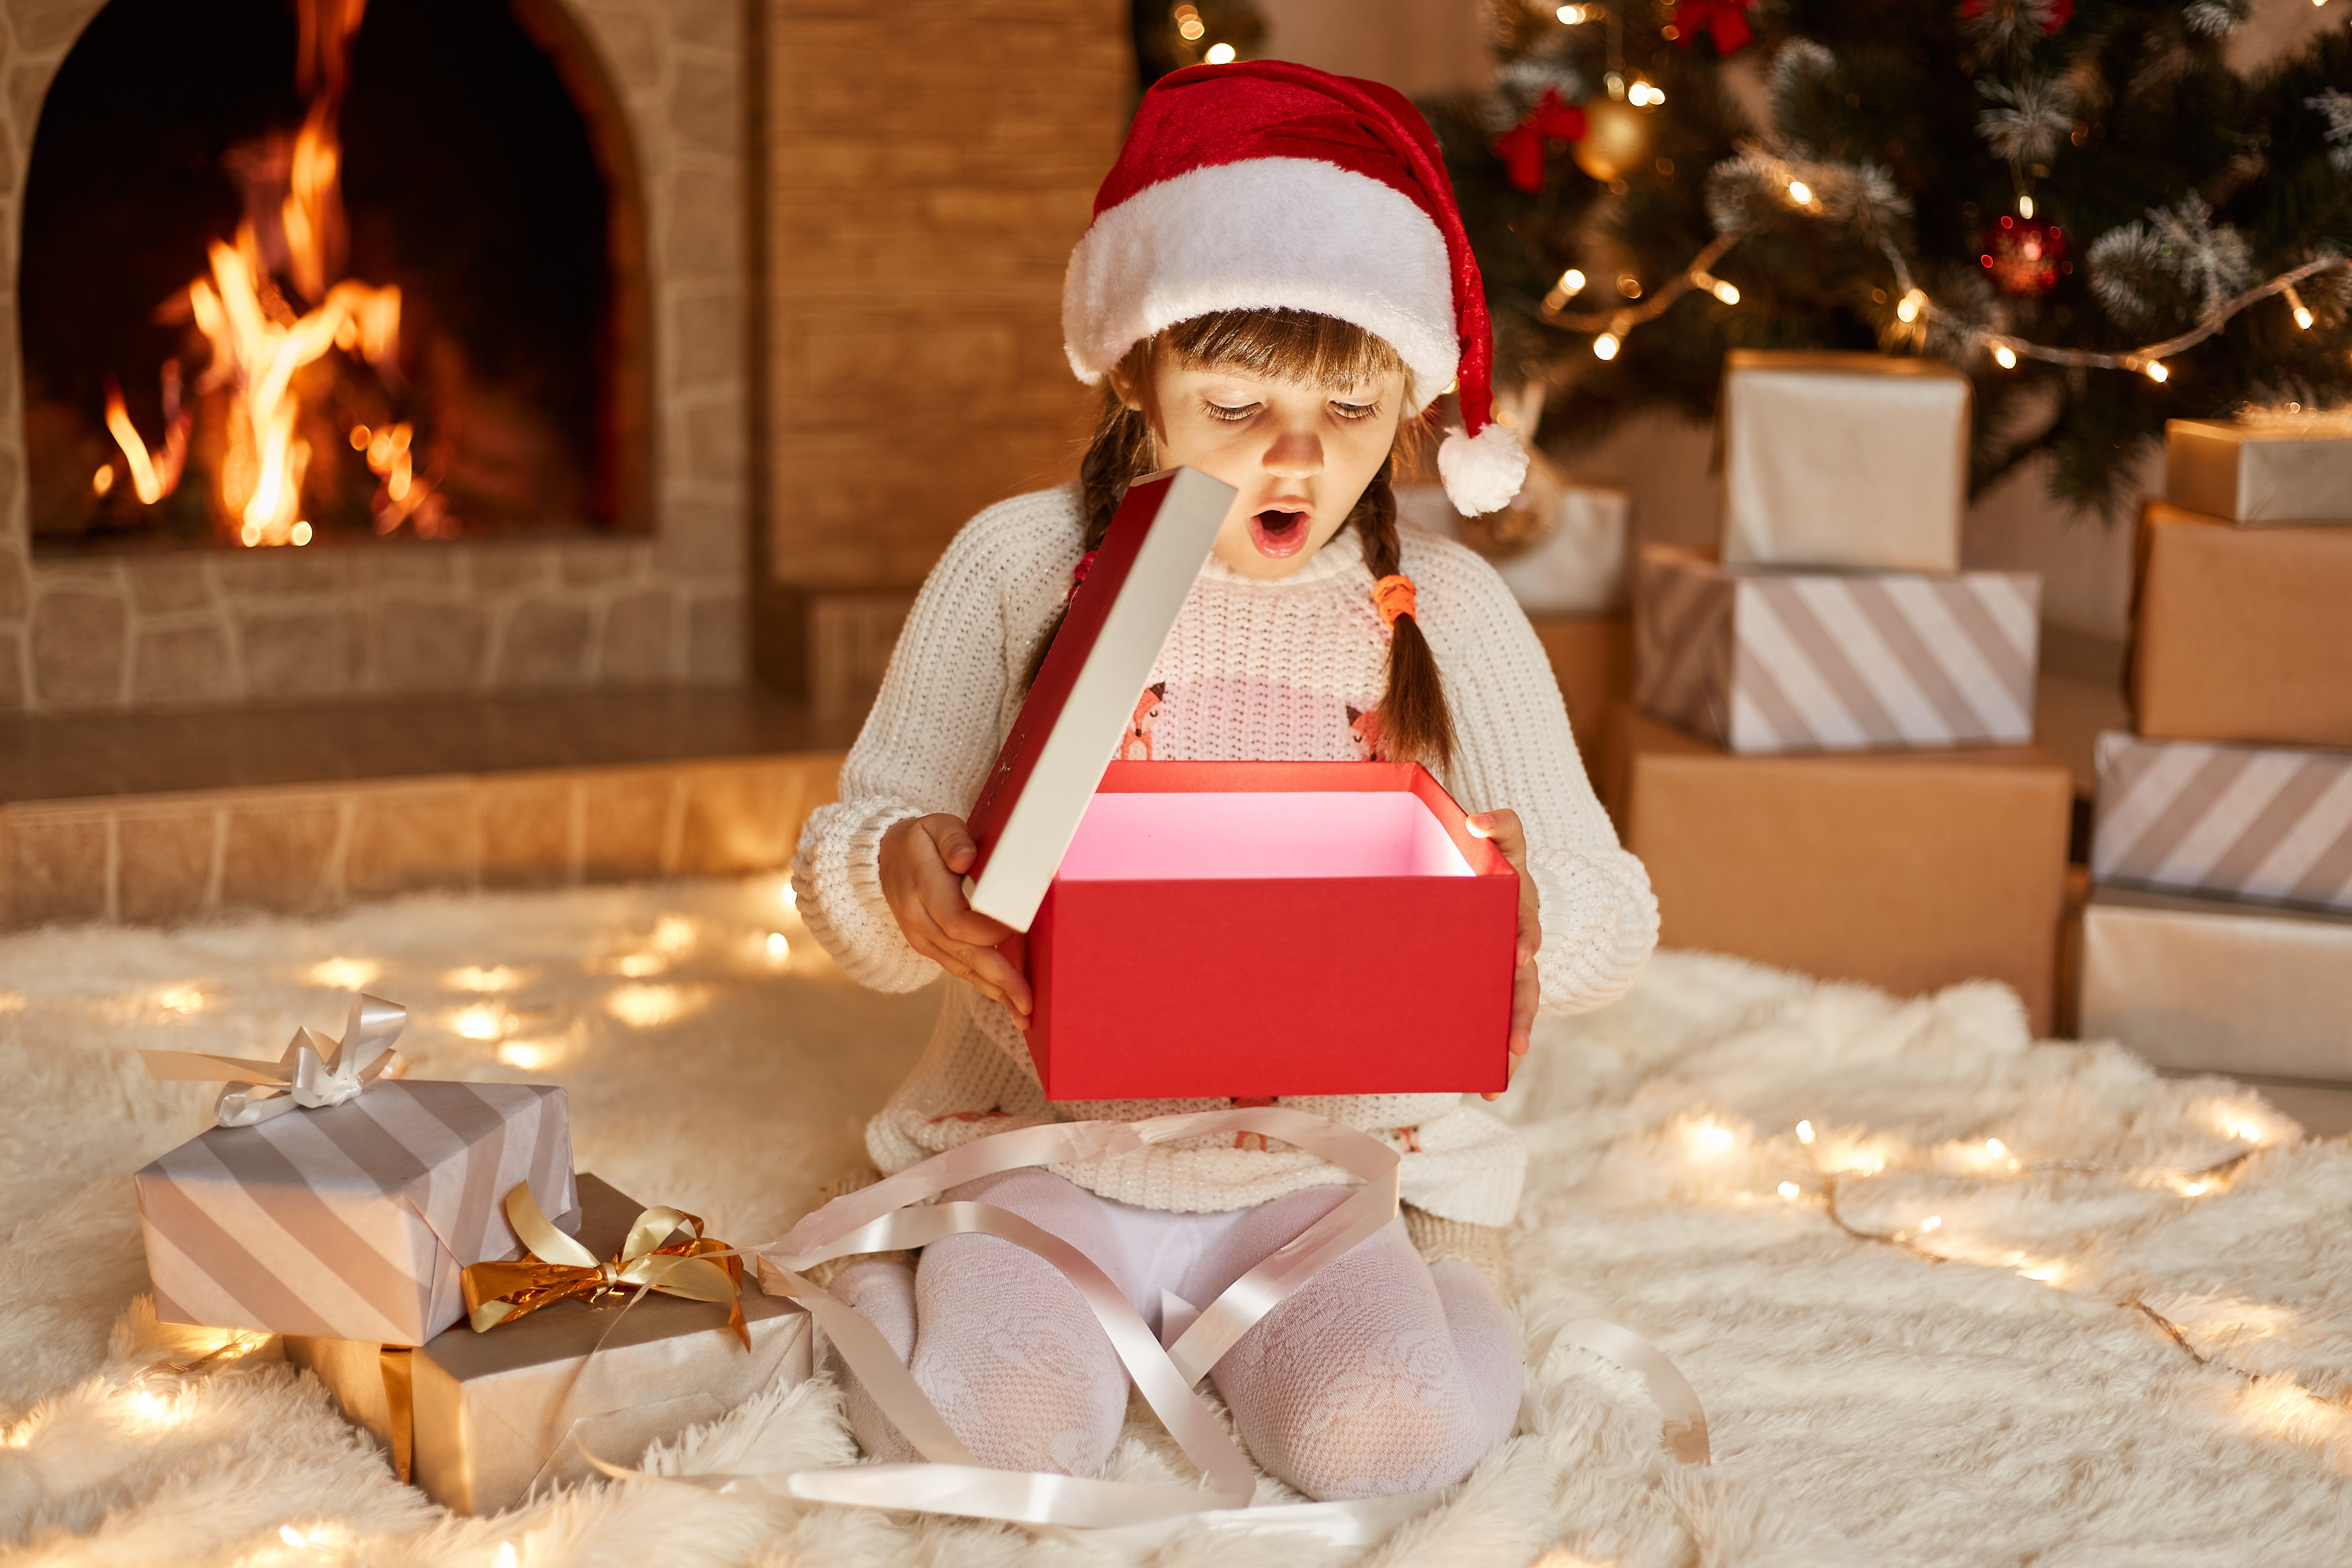 A Parent's Guide to Choosing the Perfect Christmas Gift for Kids